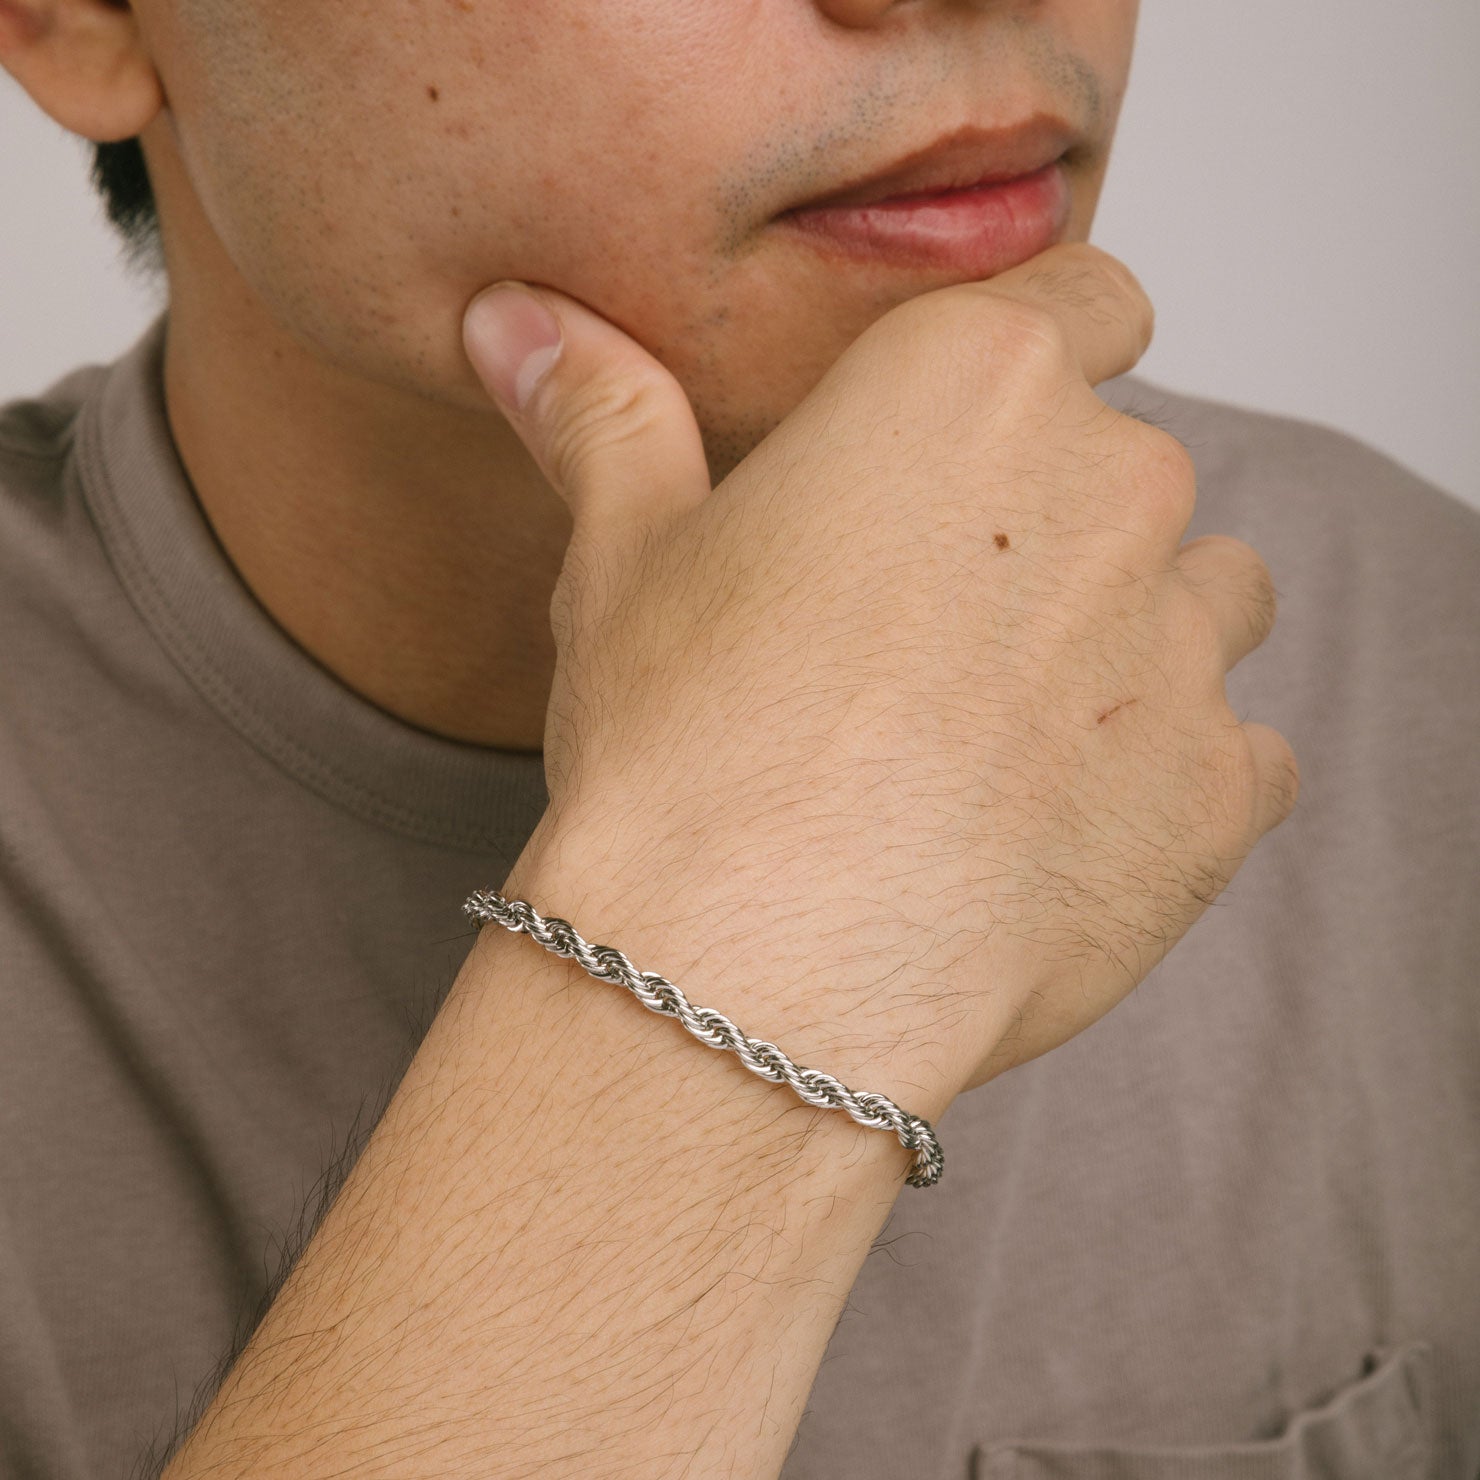 A model wearing the Twist Rope Chain Bracelet in Silver is crafted from non-tarnish and water-resistant stainless steel, with dimensions of 18 cm in length and 4 mm in width.